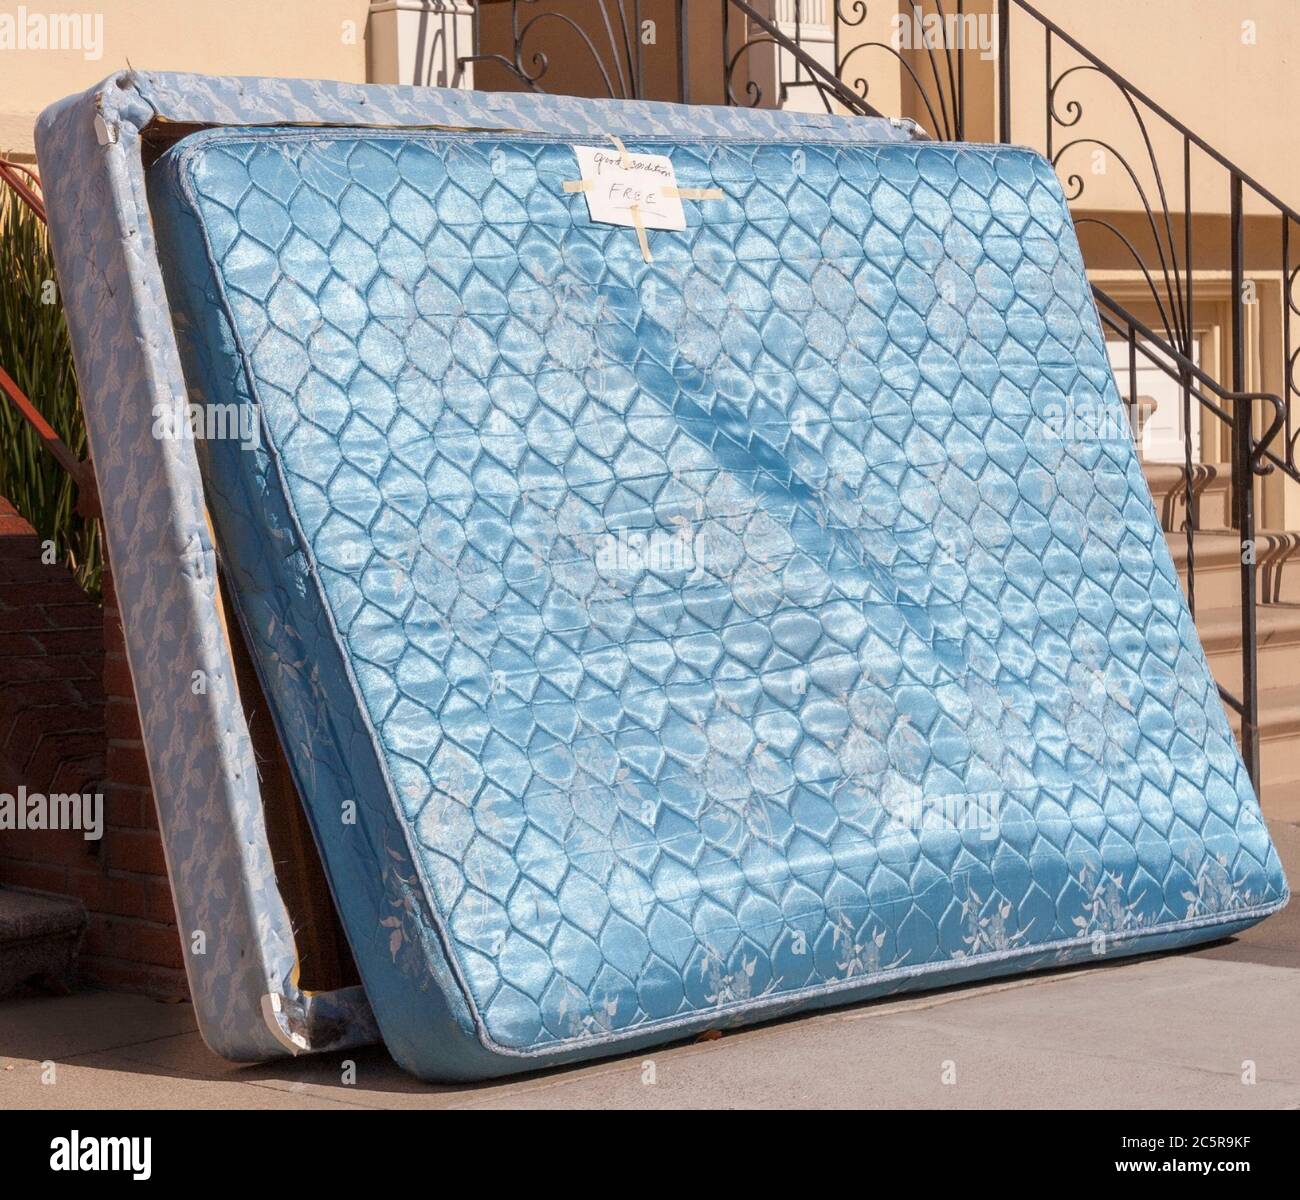 Relatively clean mattress and box spring discarded outside urban apartment building. Free to good home. Stock Photo